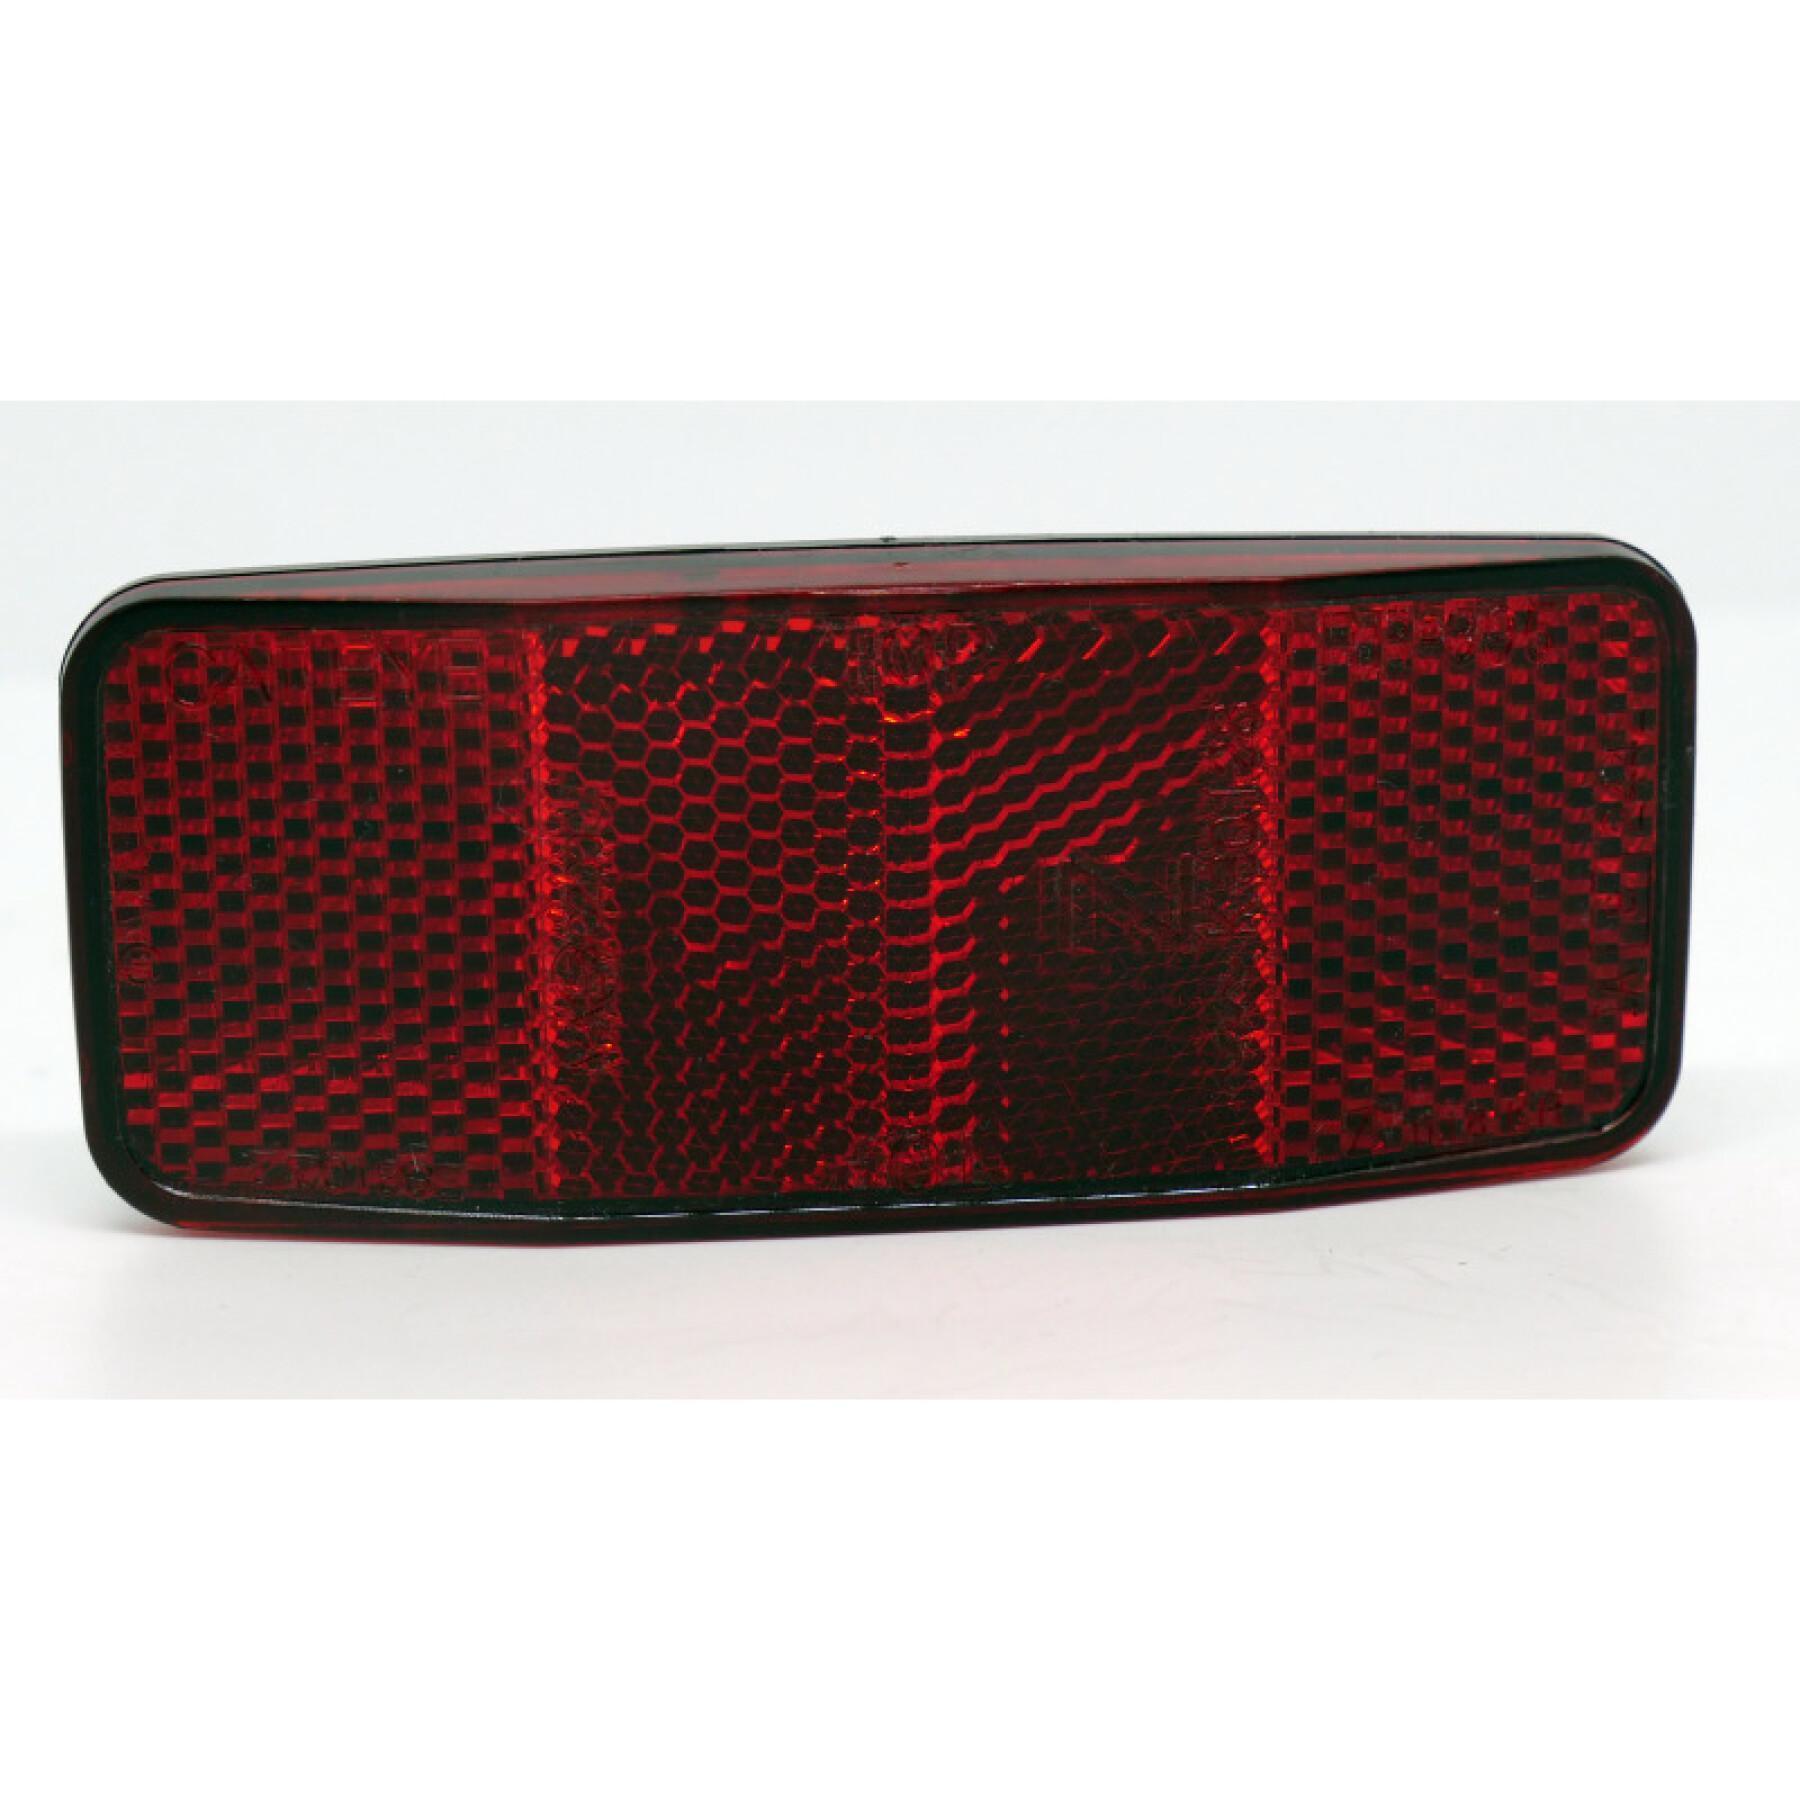 Red reflector set marked z & k compatible with all trailers Hamax